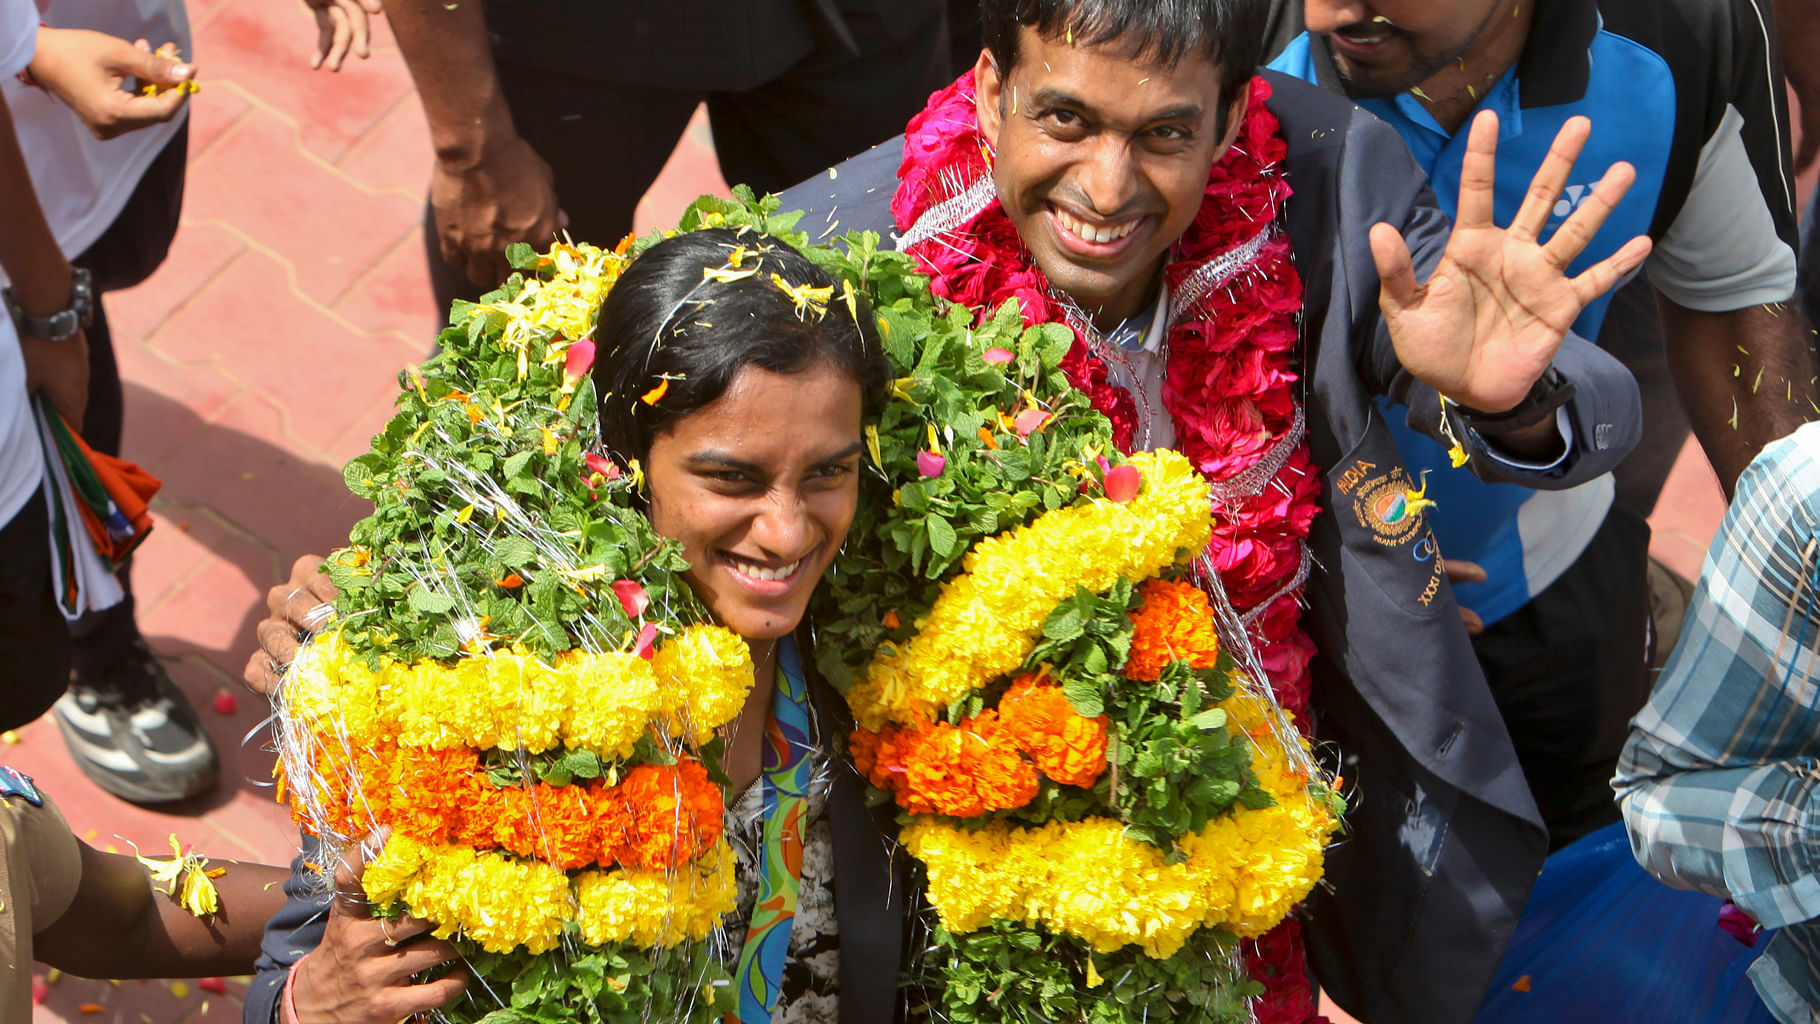 Olympic silver medalist PV Sindhu and her coach Pullela Gopichand wave to the crowd after reaching the Gopichand Academy in Hyderabad. (Photo: AP)